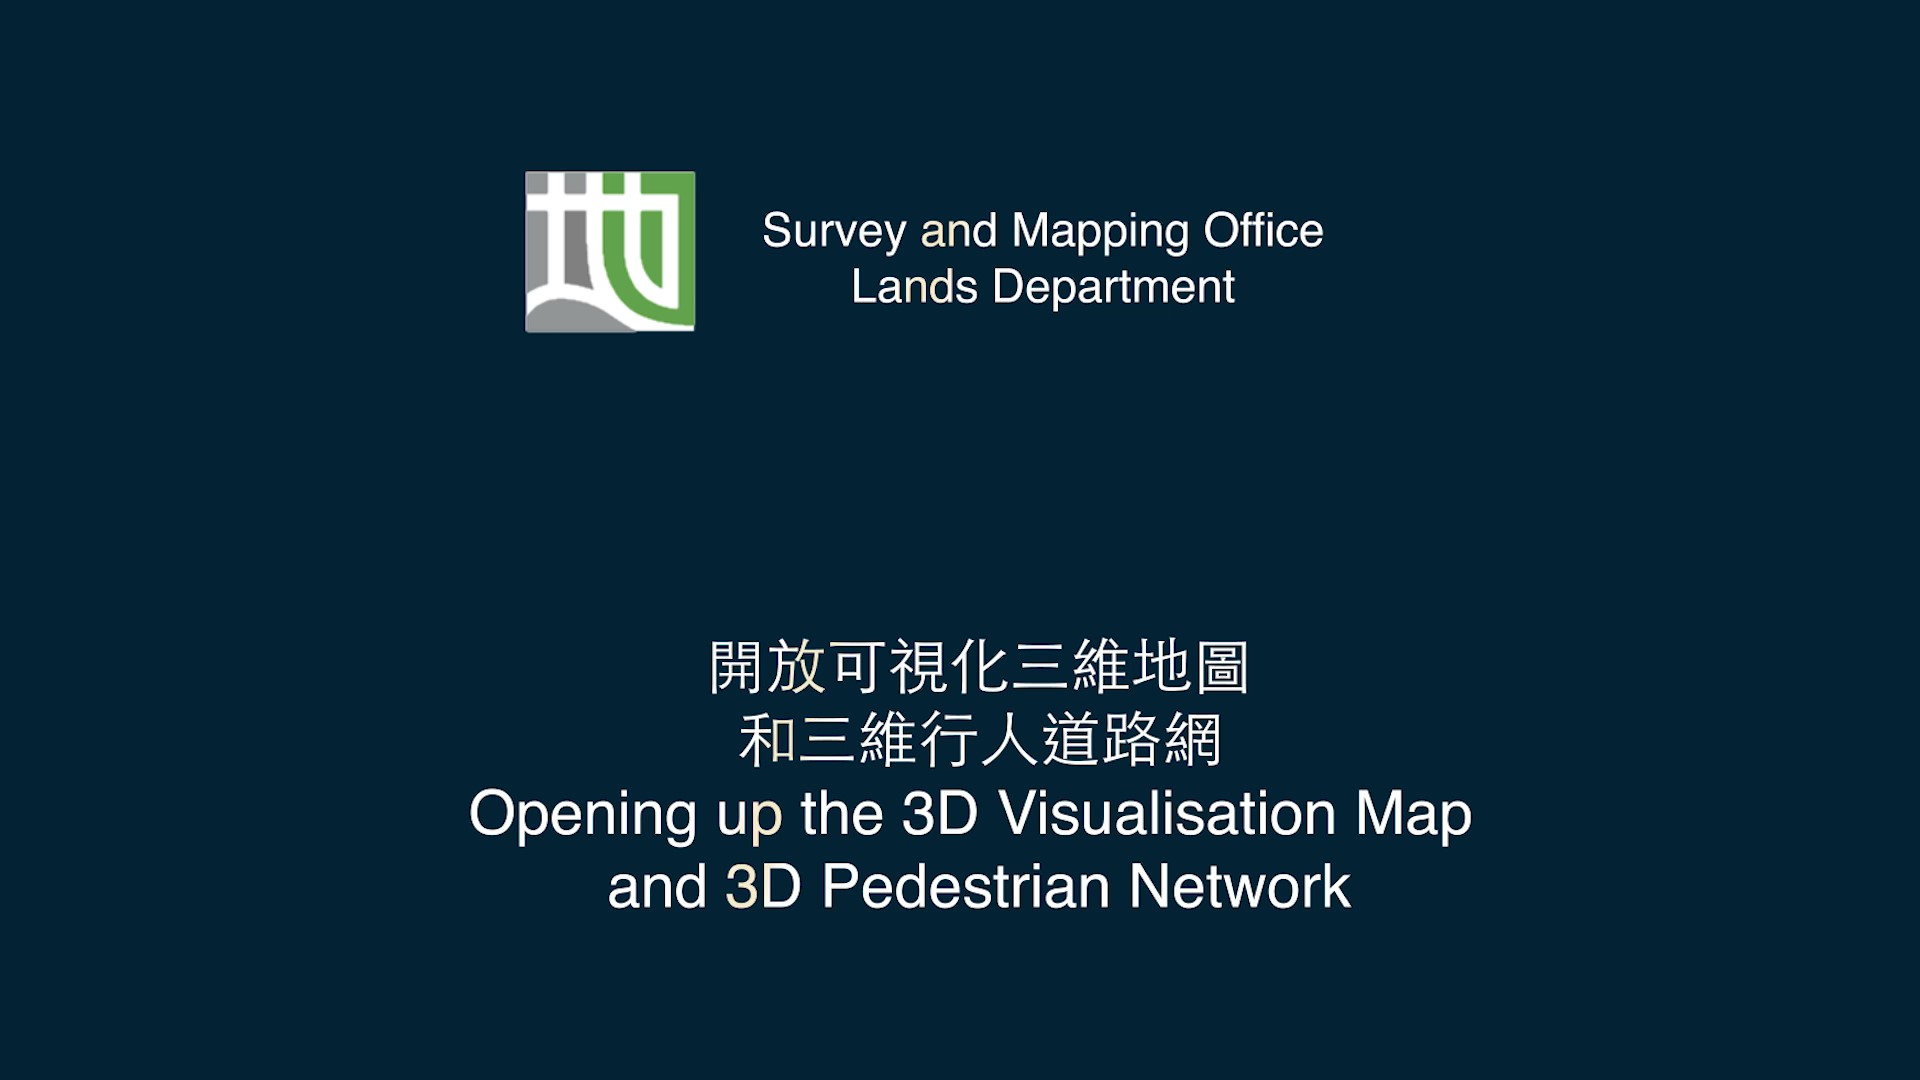 3D Pedestrian Network and 3D Visualisation Map datasets made free to public